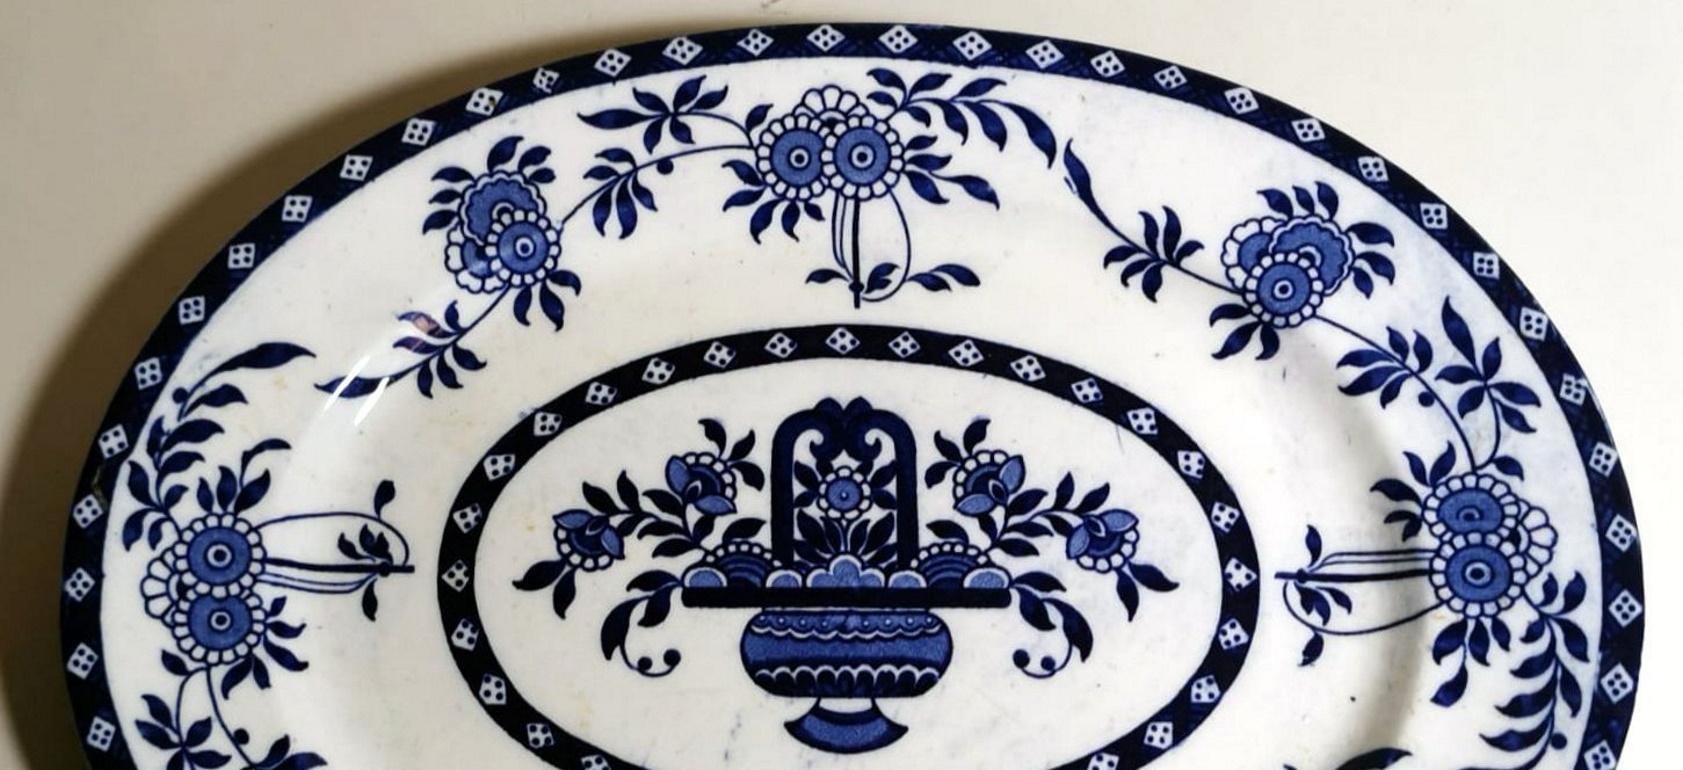 Staffordshire Potteries English Tray with Blue Transferware Decorations In Good Condition For Sale In Prato, Tuscany